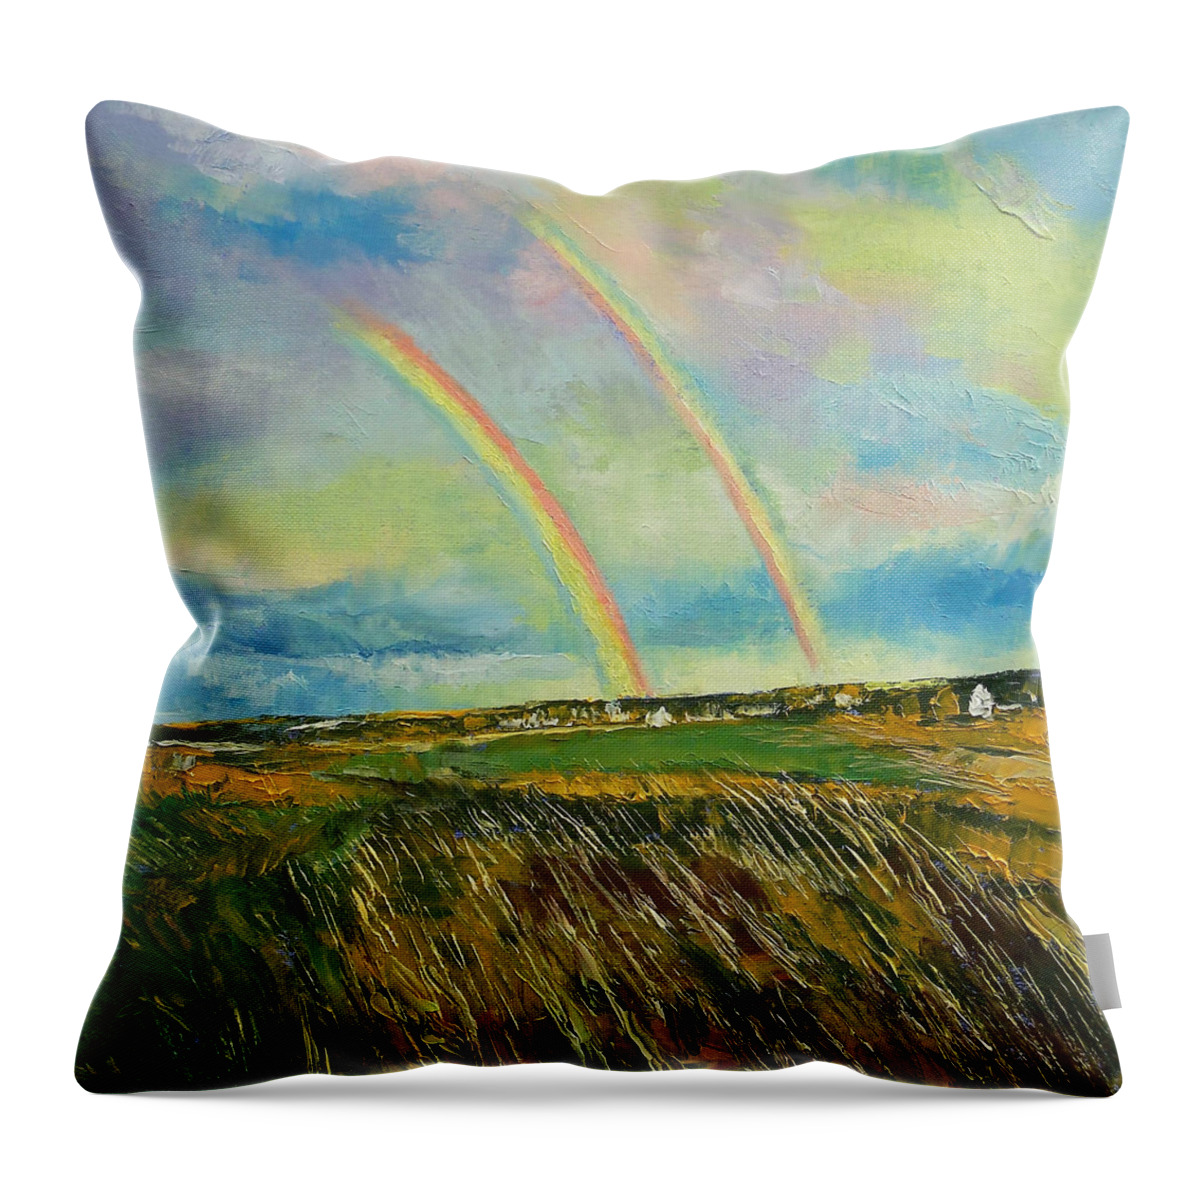 Scotland Throw Pillow featuring the painting Scotland Double Rainbow by Michael Creese